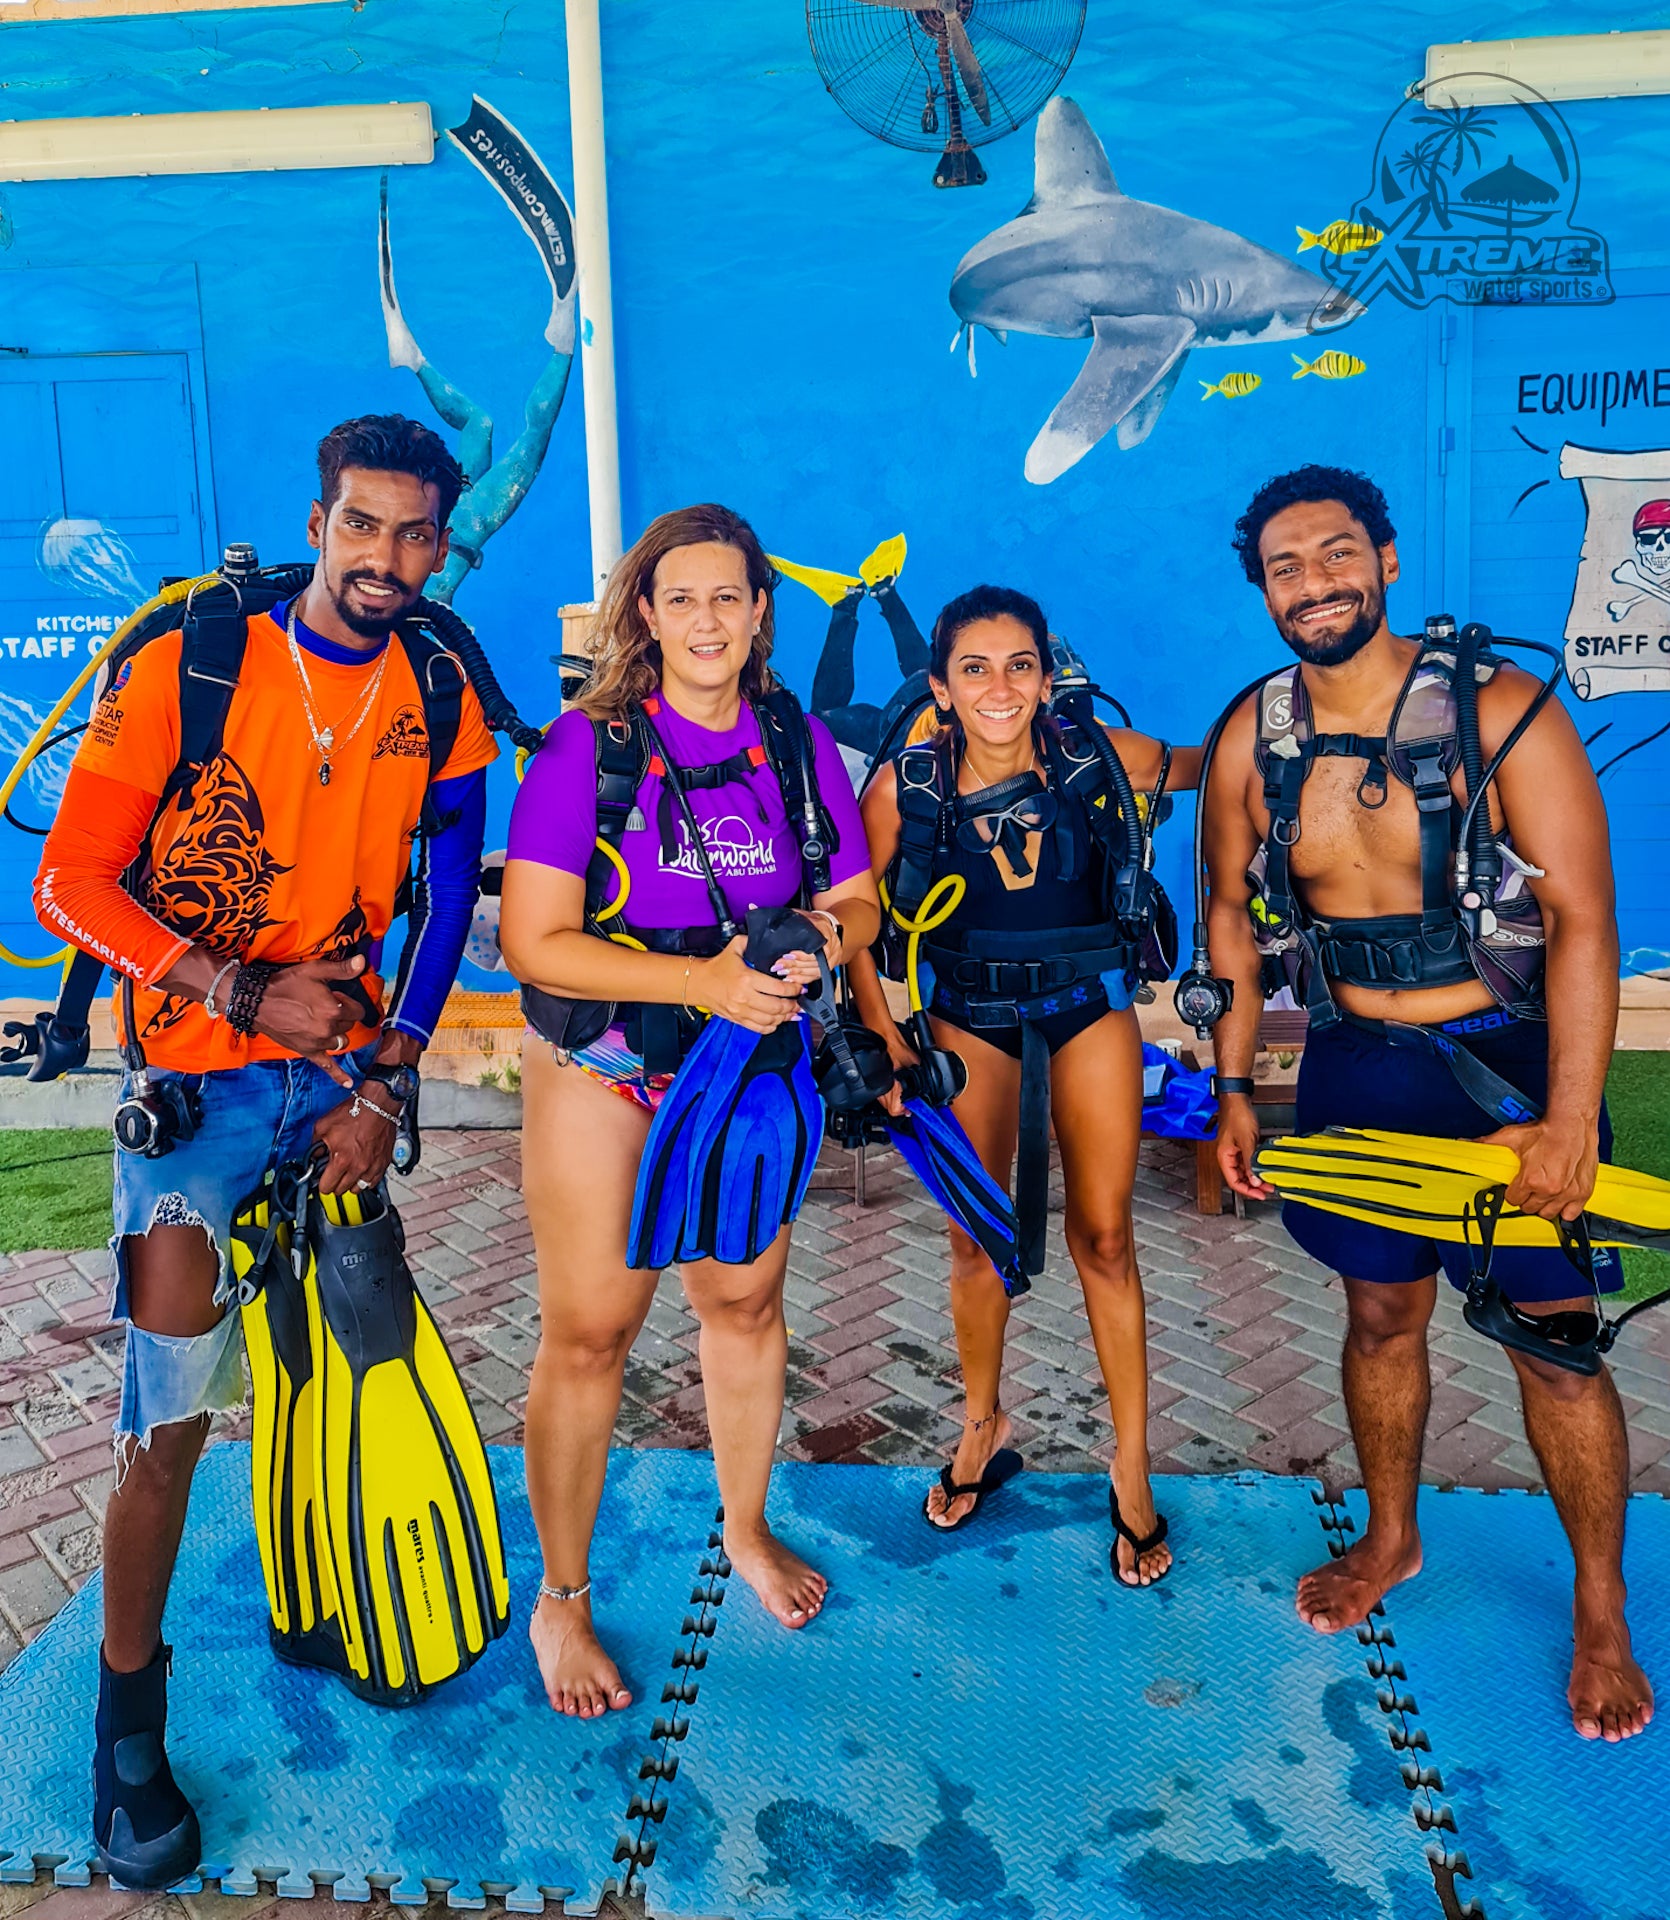 PADI DISCOVER SCUBA DIVING EXPERIENCE – Extreme Watersports